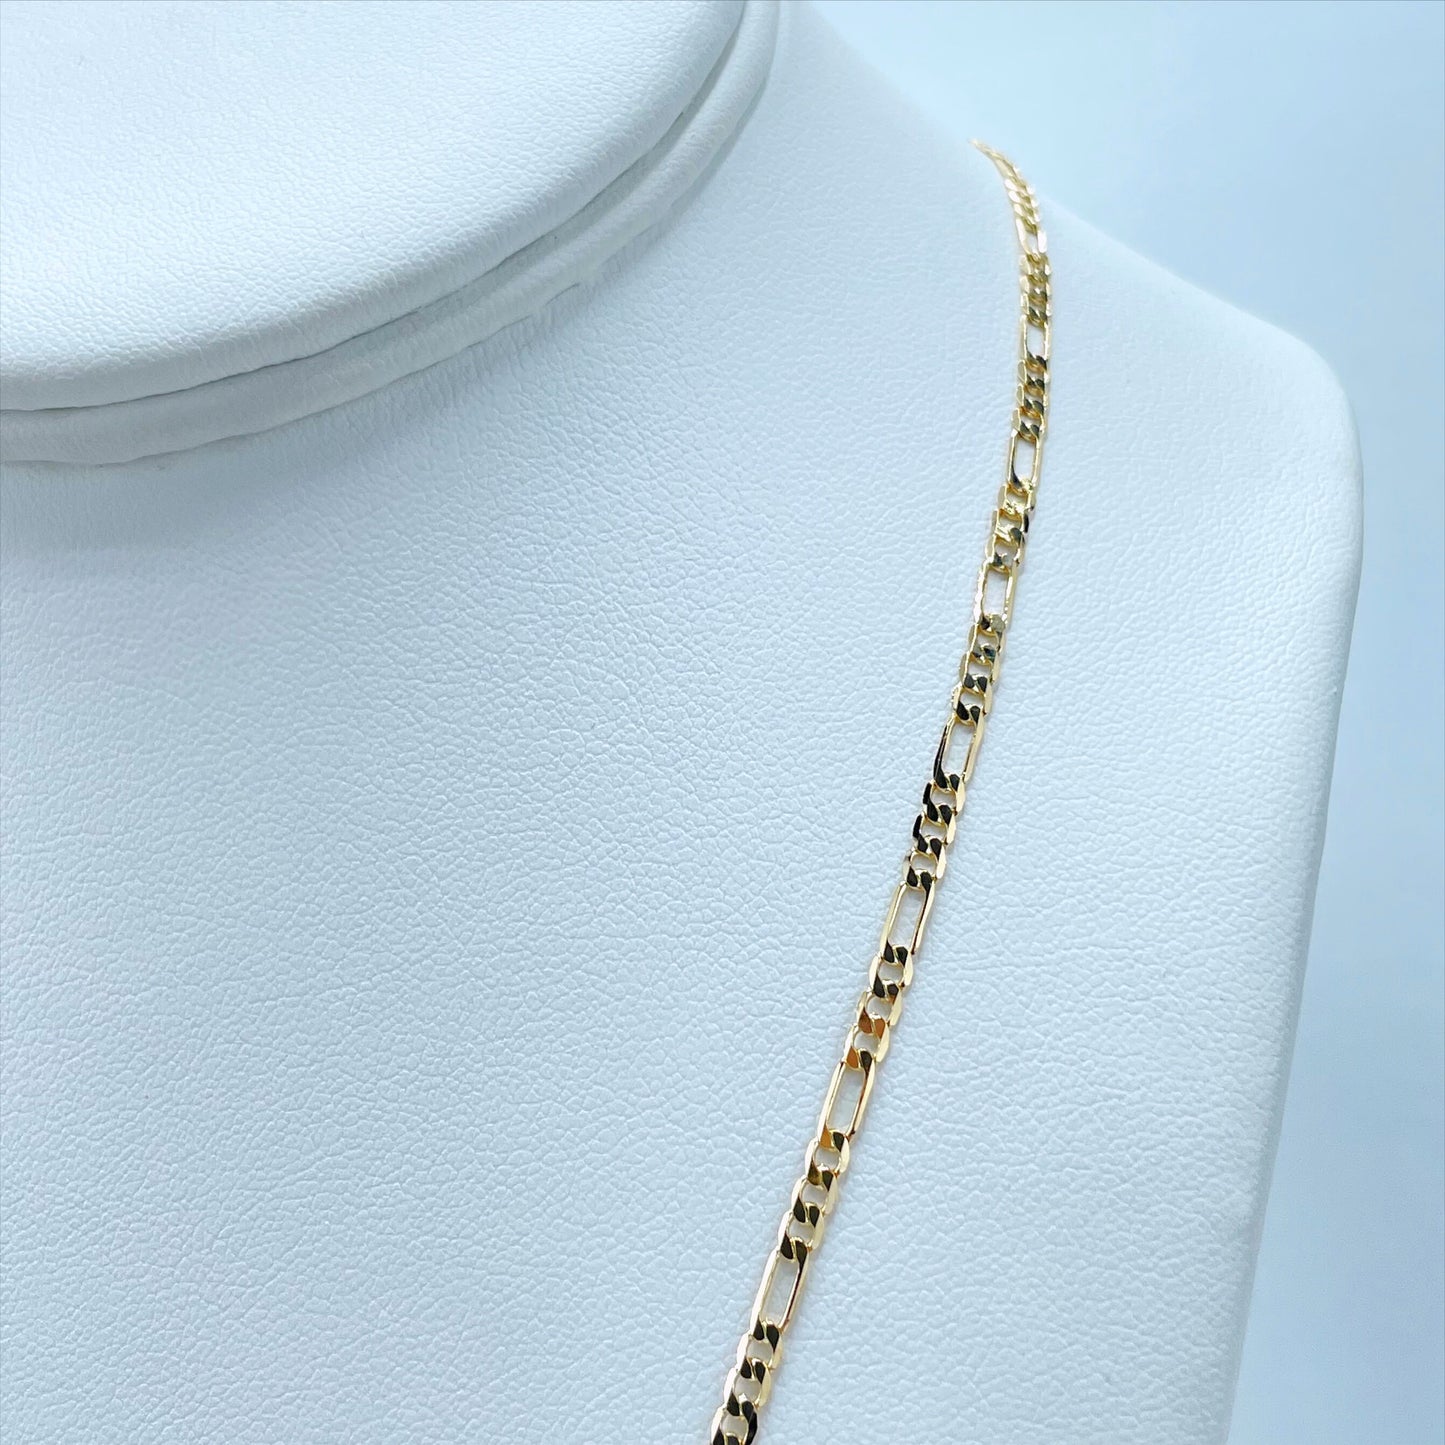 18k Gold Filled 3mm Figaro Link, 24 inches of length, Chains Wholesale and Jewelry Supplies